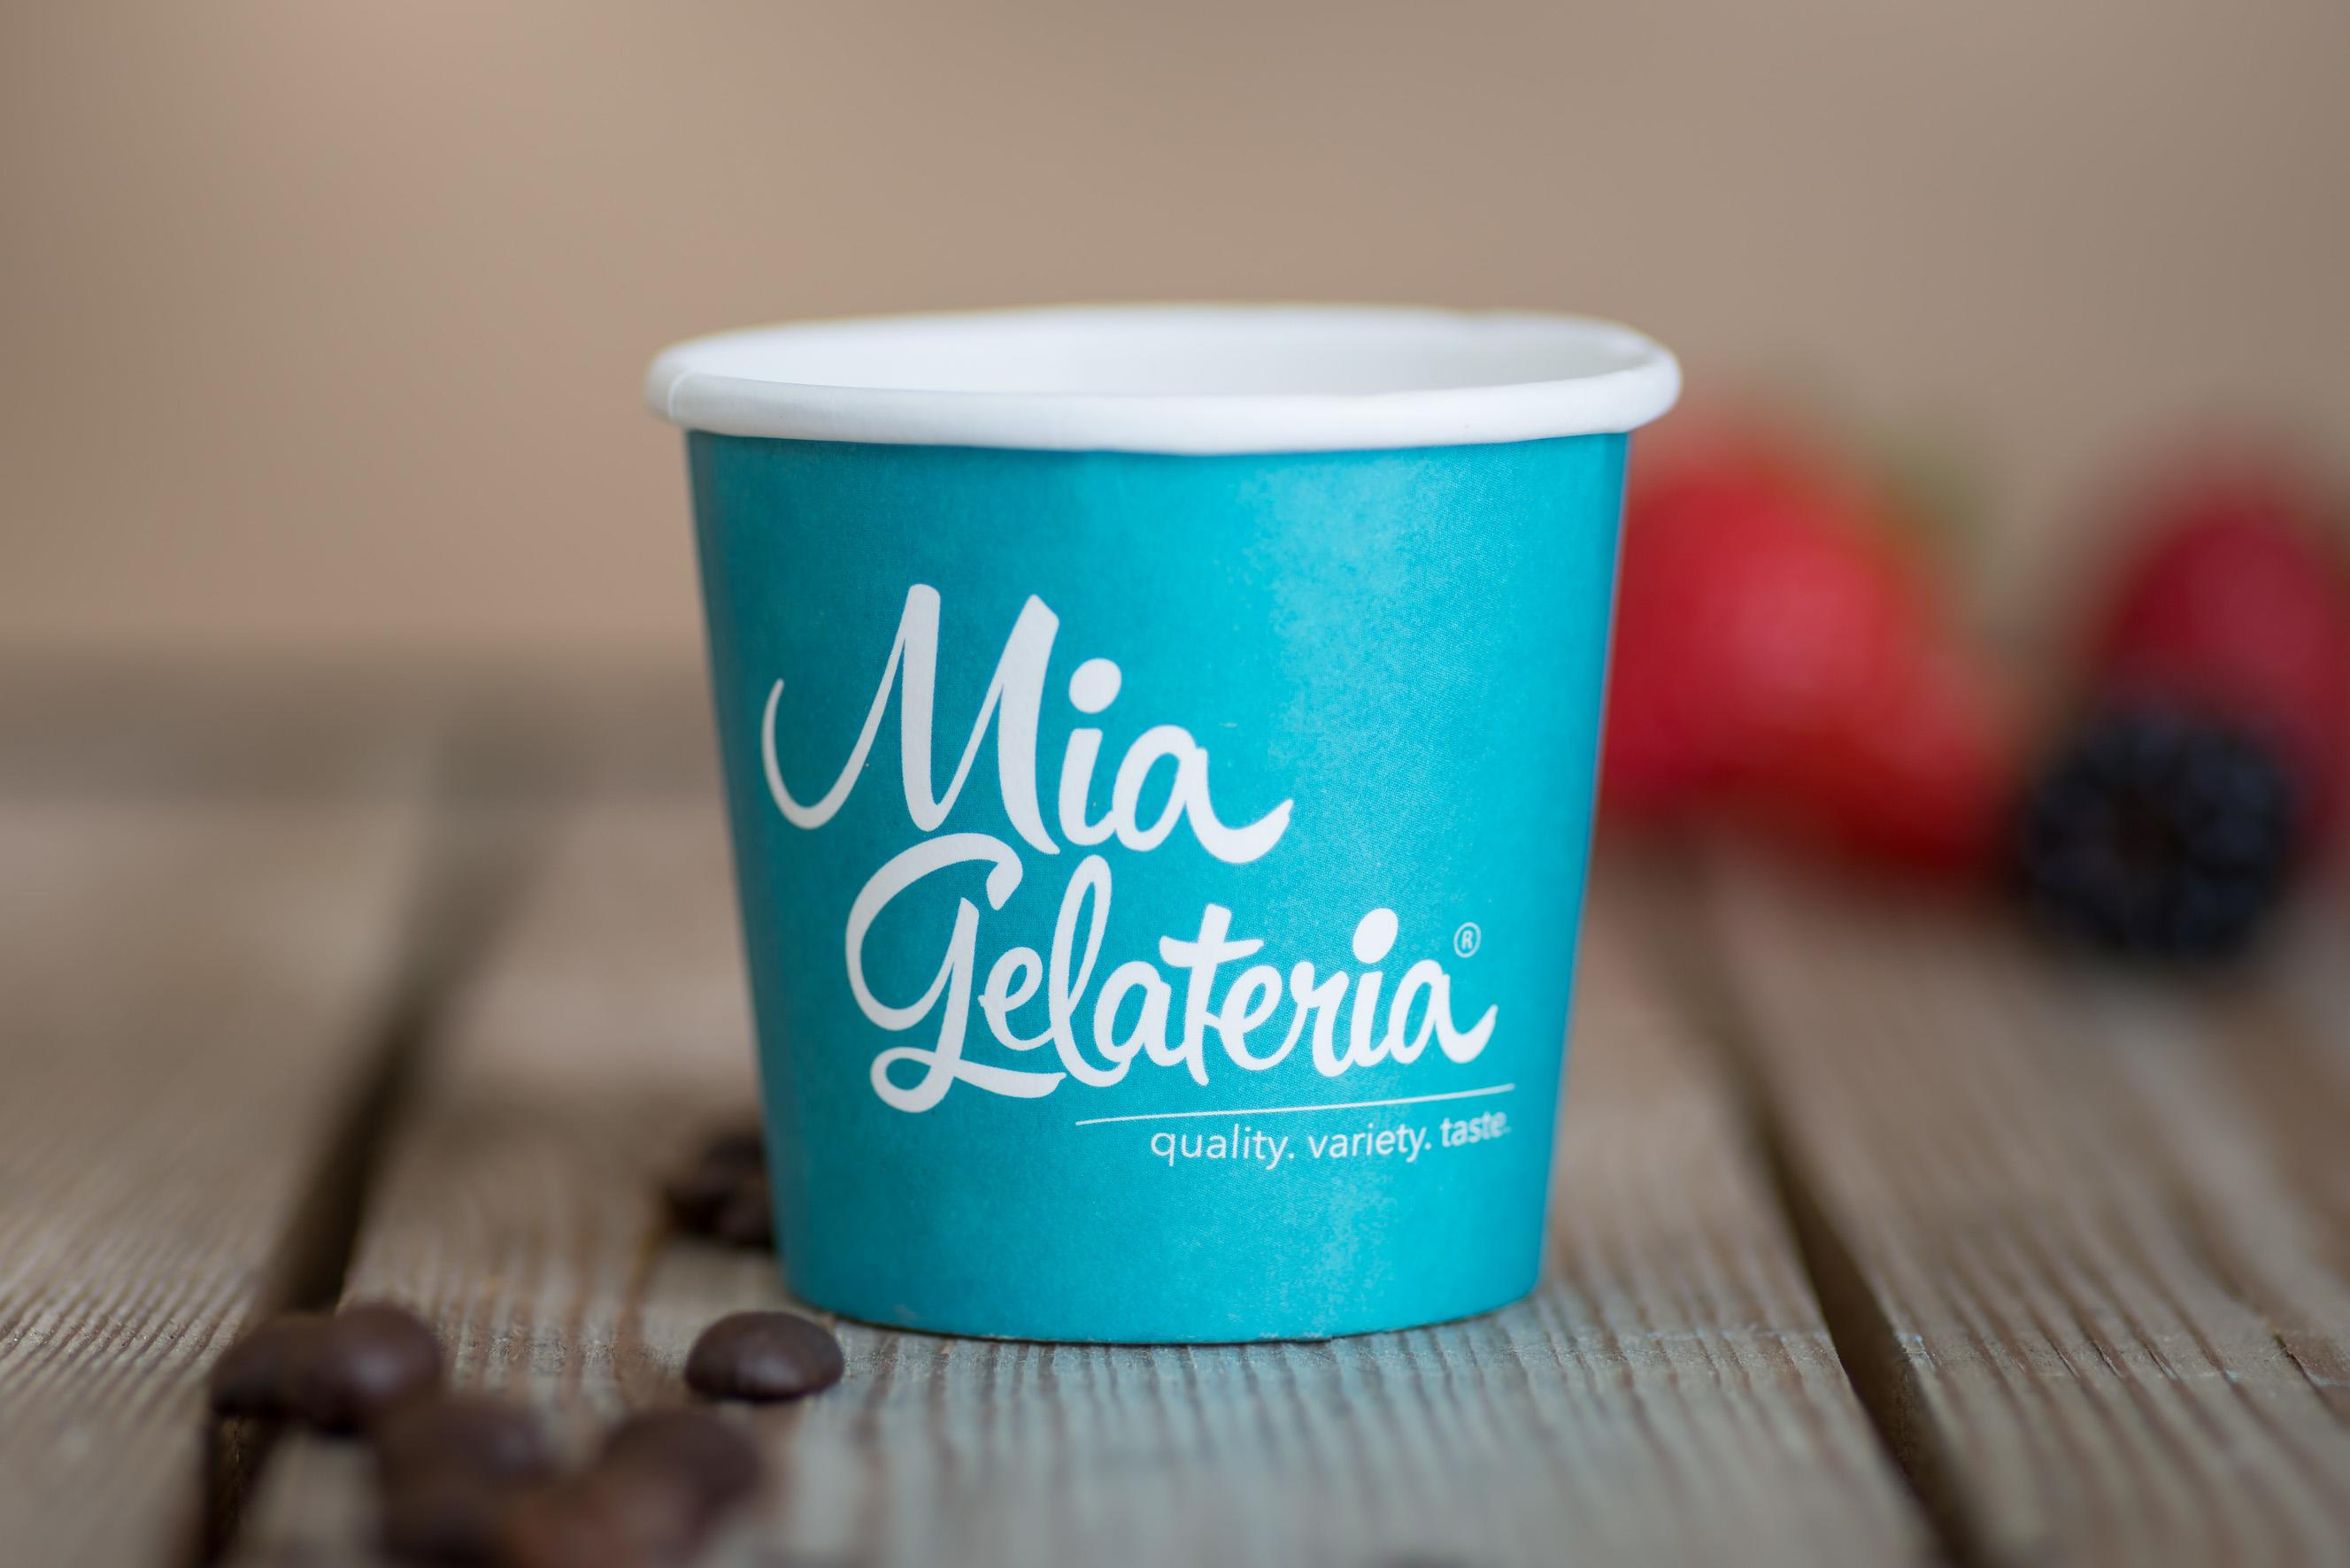 Custom 4 oz Paper Cups  Personalize Your Espresso - Your Brand Cafe